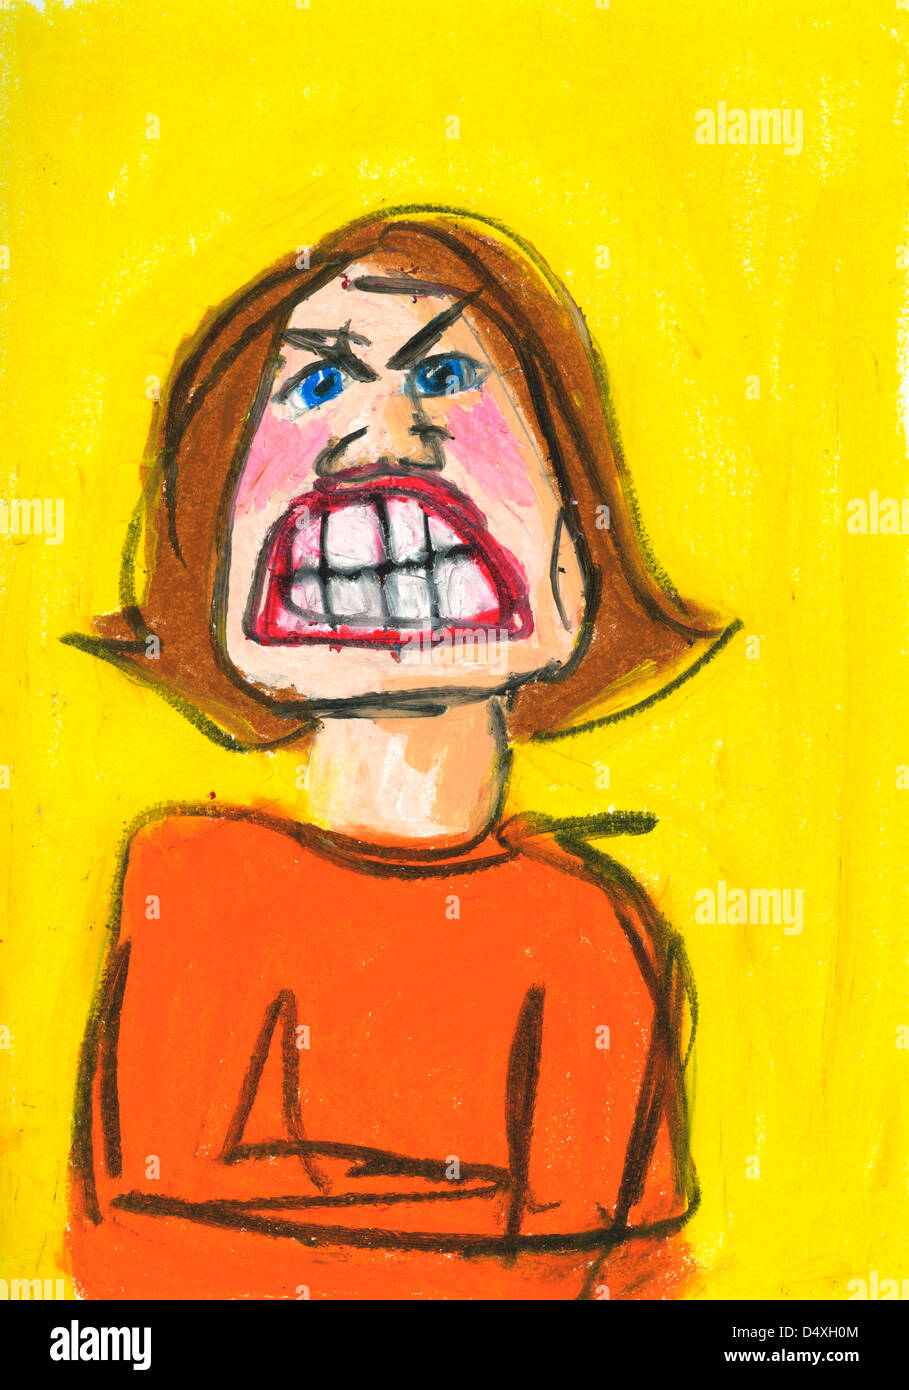 Expressive portrait of an angry woman showing her teeth. Stock Photo